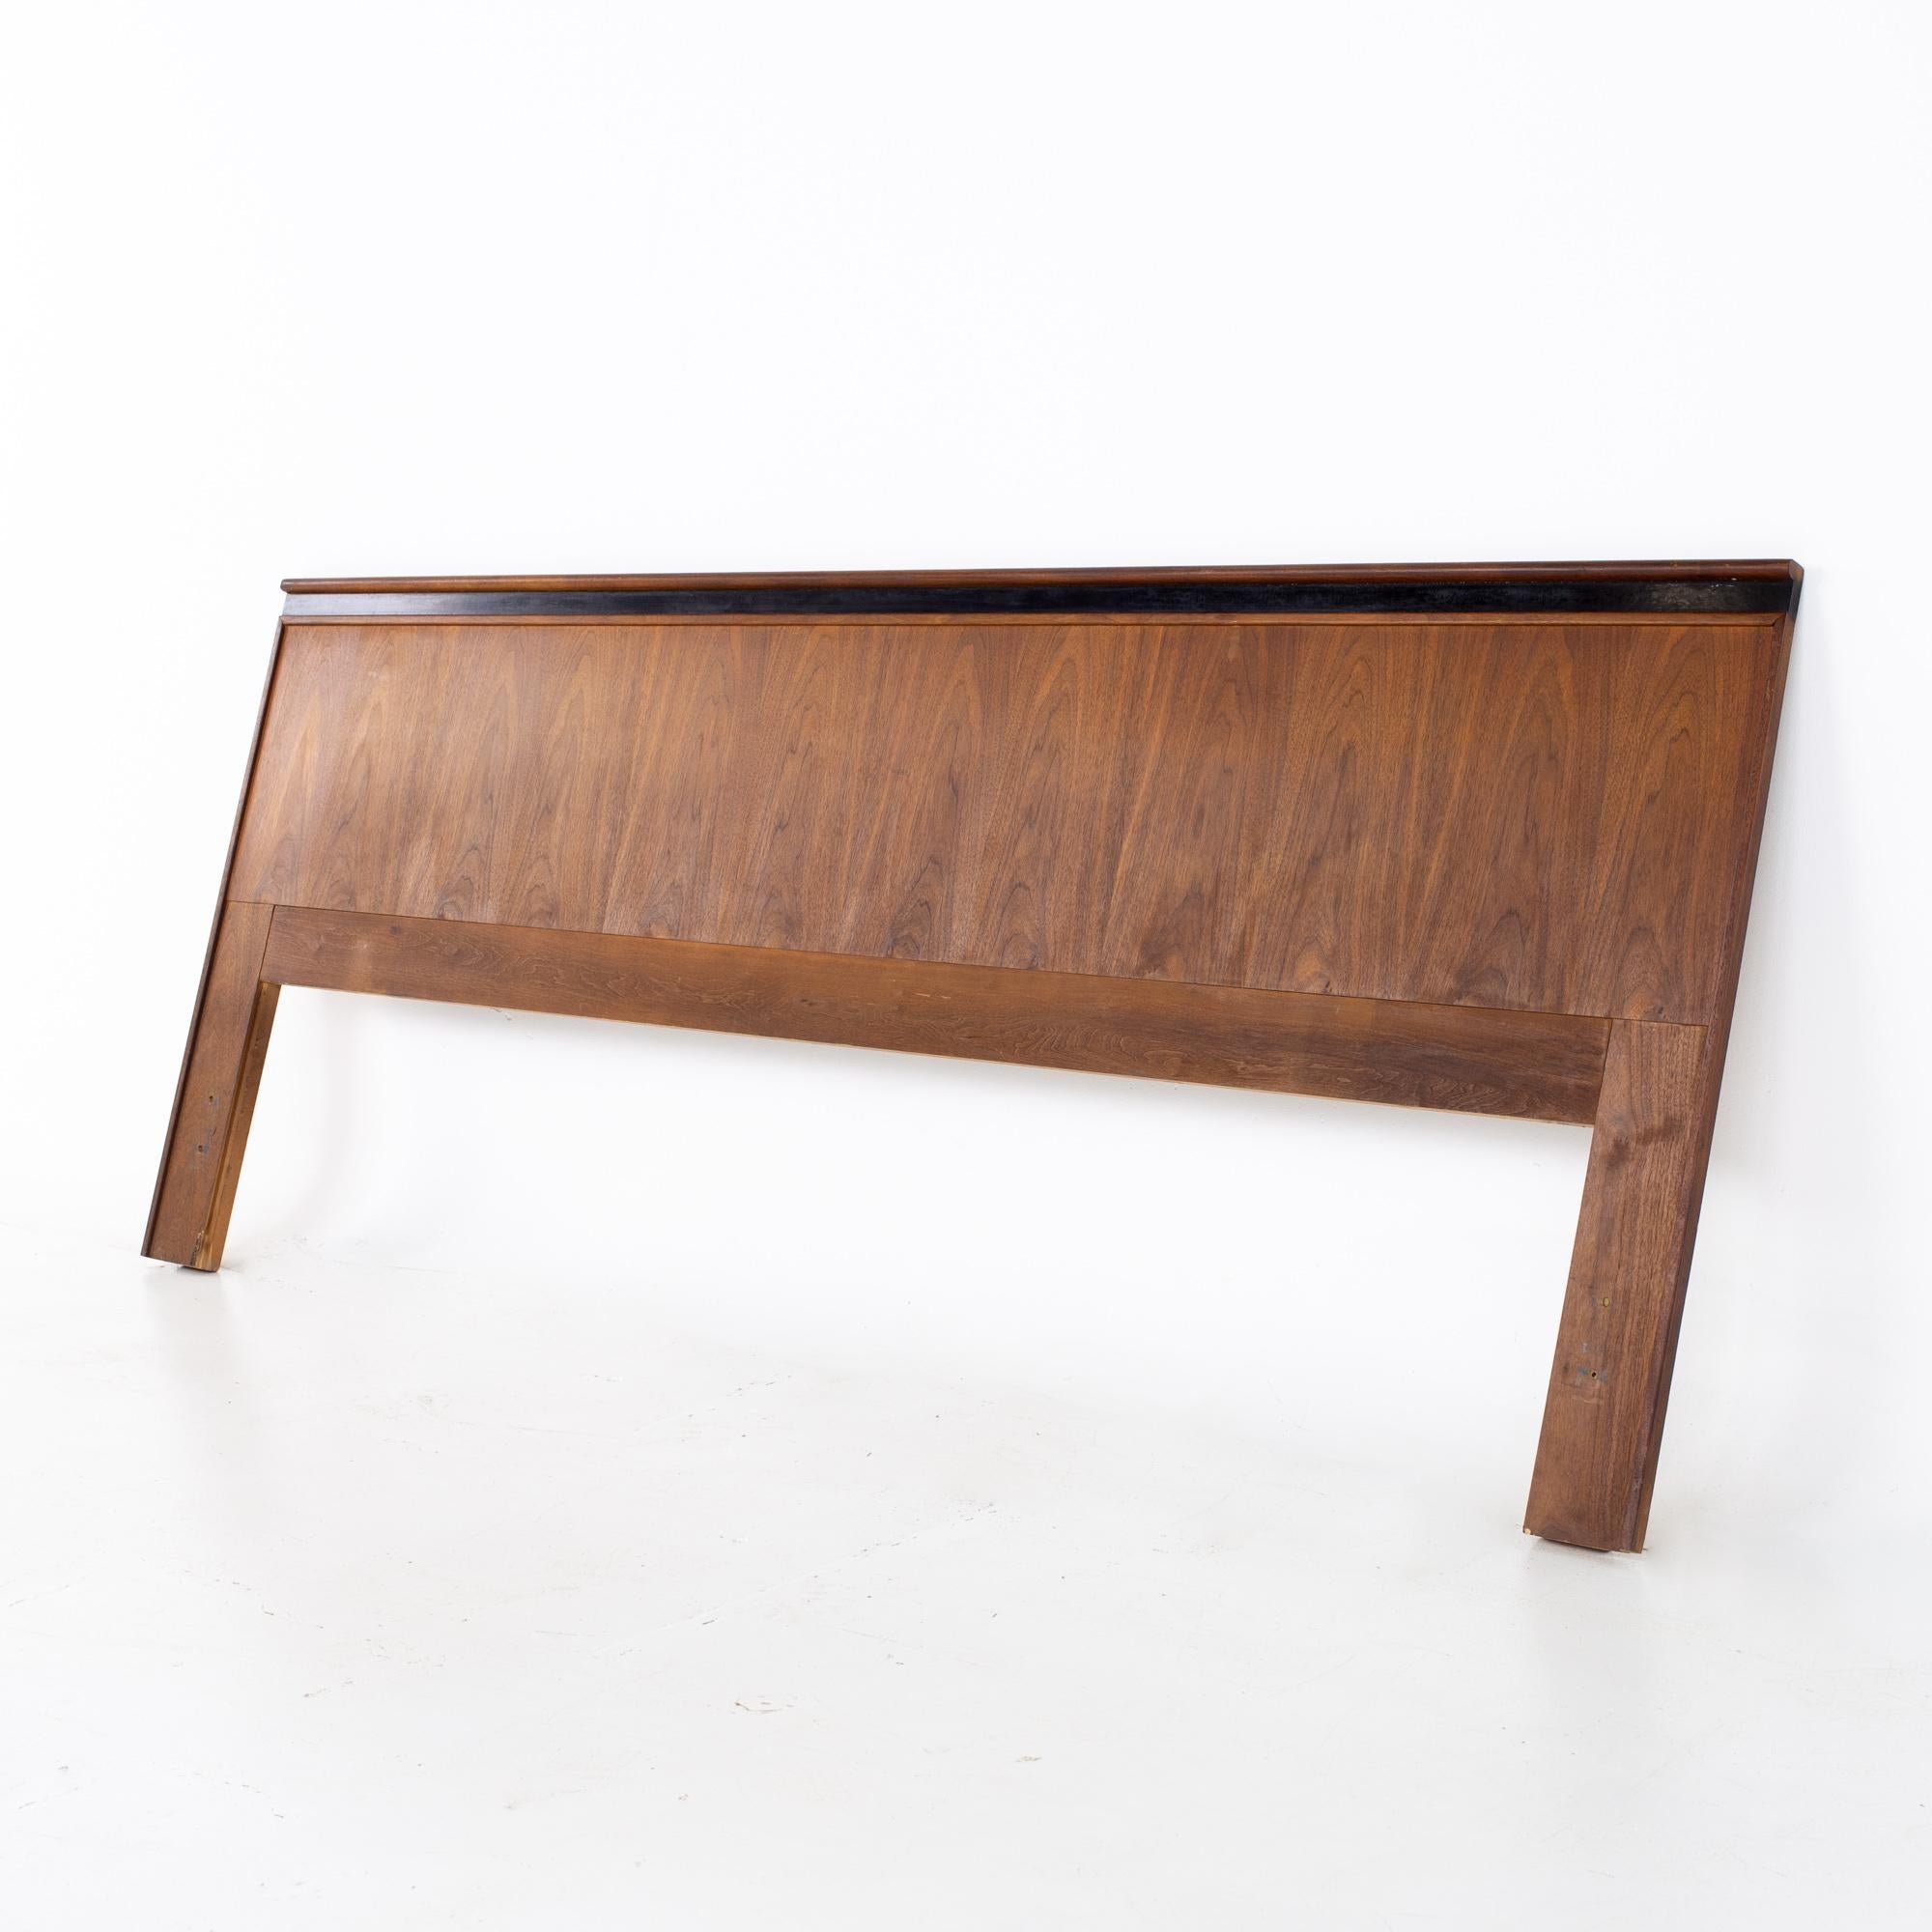 Merton Gershun for Dillingham Esprit mid century walnut king headboard
Headboard measures: 81 wide x 1.5 deep x 35 inches high

All pieces of furniture can be had in what we call restored vintage condition. That means the piece is restored upon